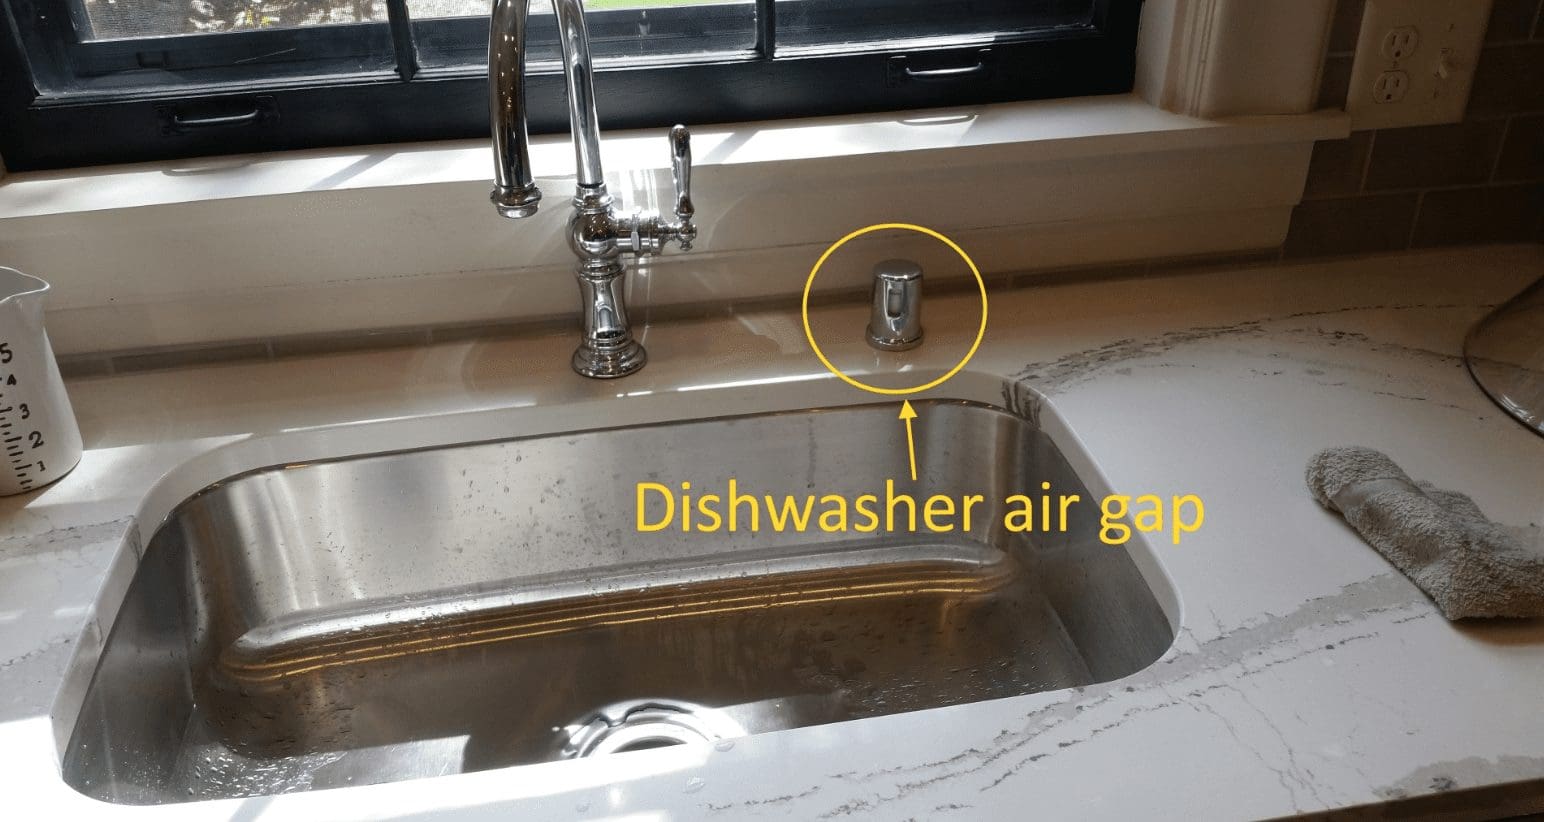 Plugged air gap as a reason for water in bottom of dishwasher